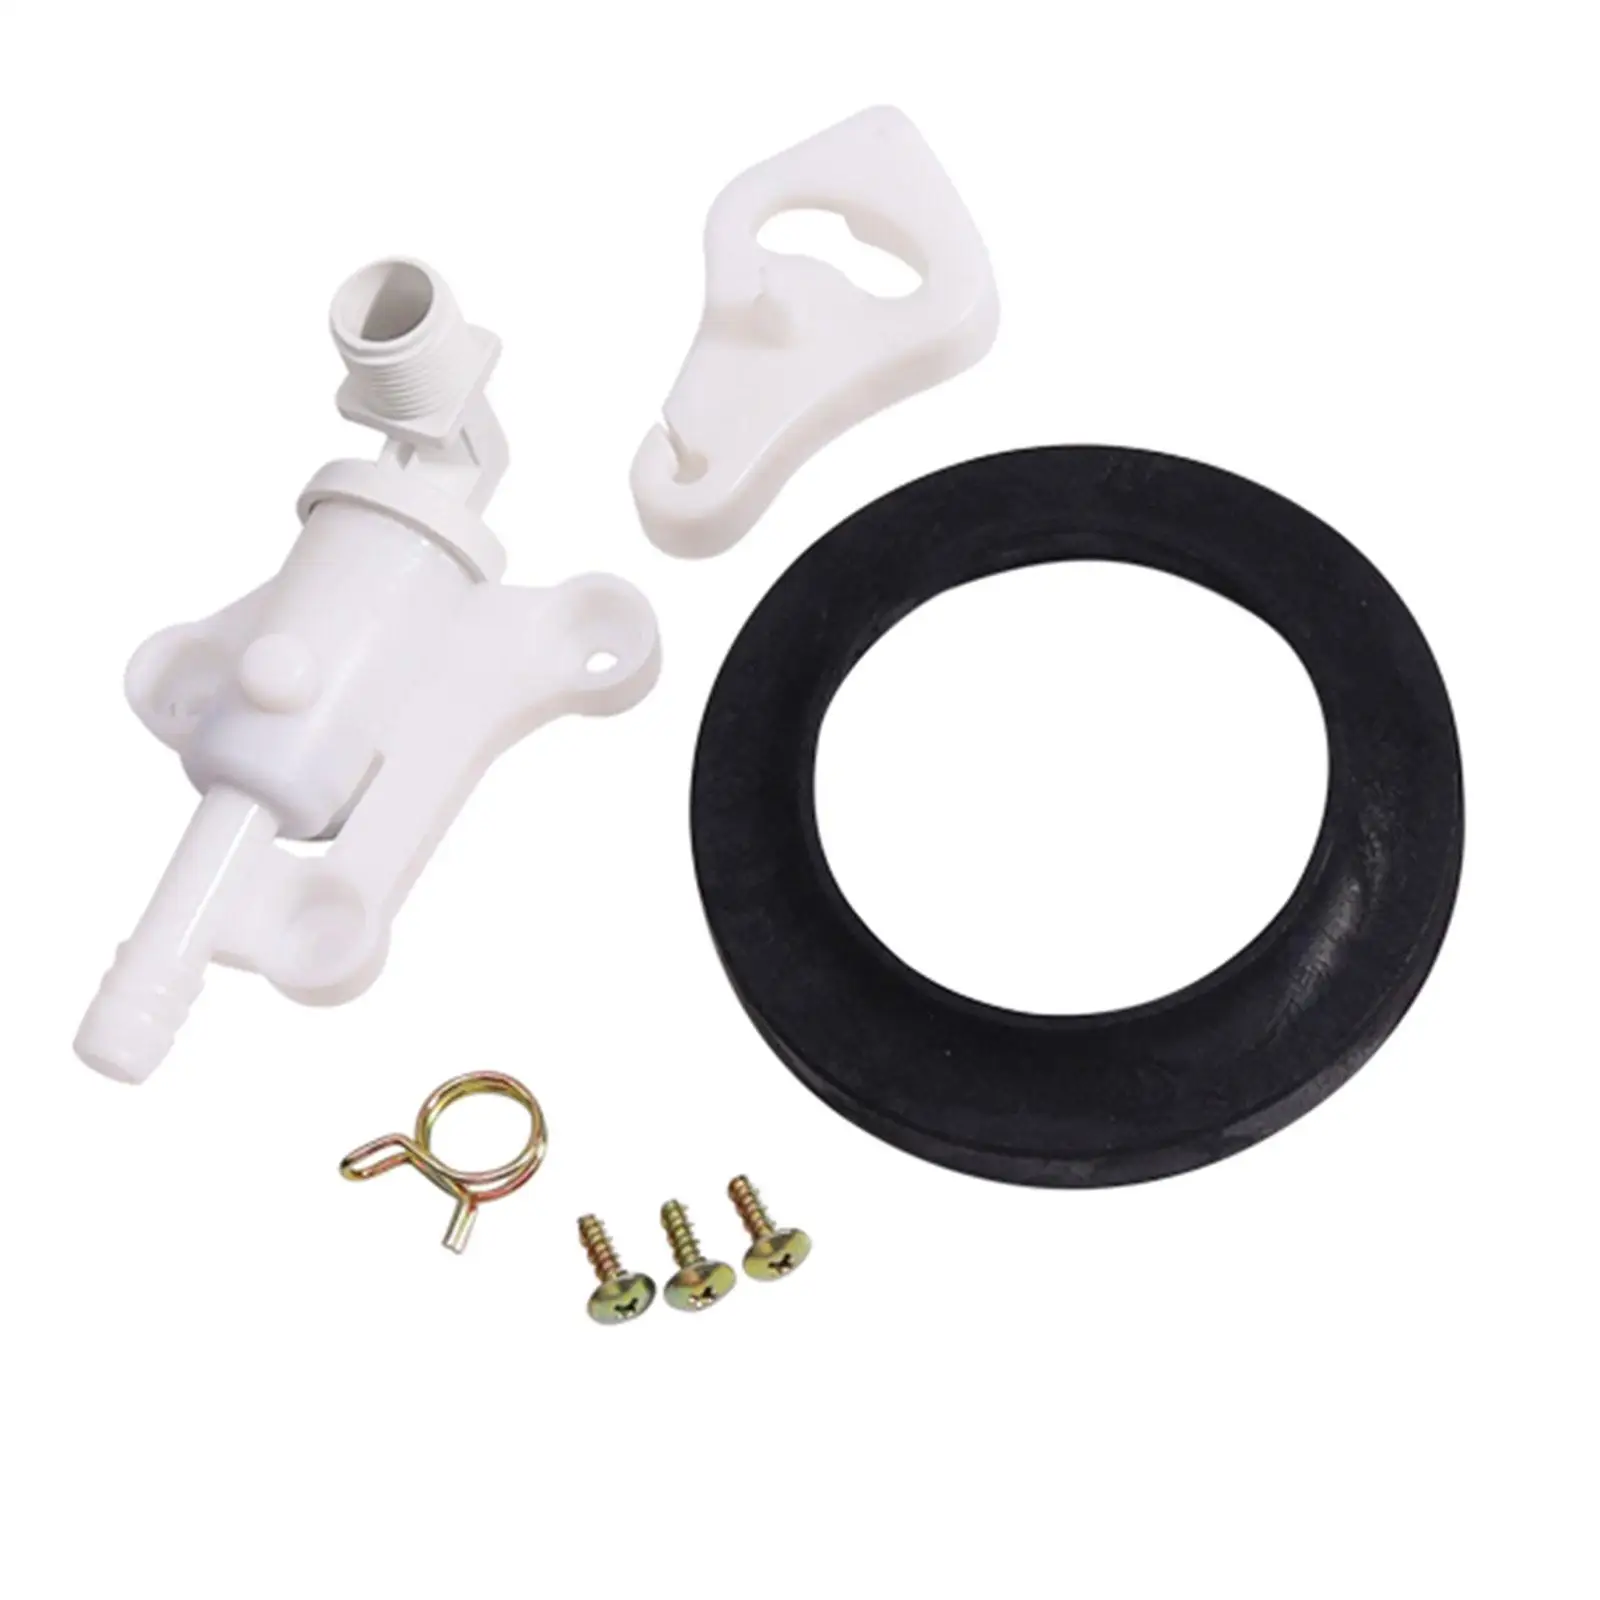 34100 Water Valve for Style Plus Toilets Replace Parts Accessory for Easy to Install Convenient Practical Durable